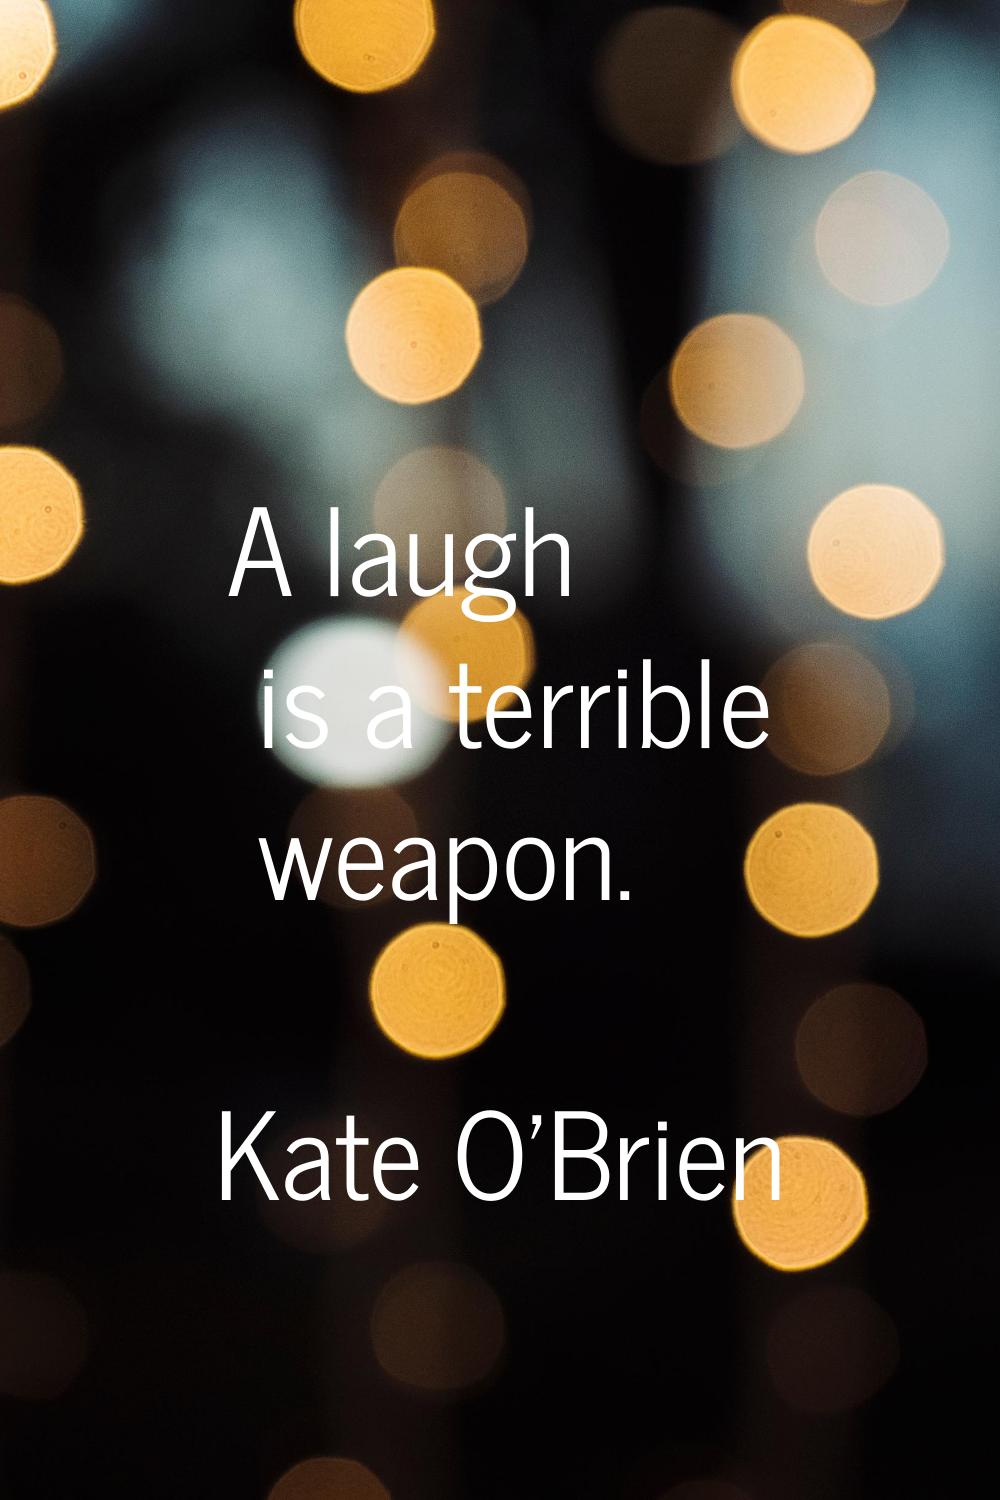 A laugh is a terrible weapon.